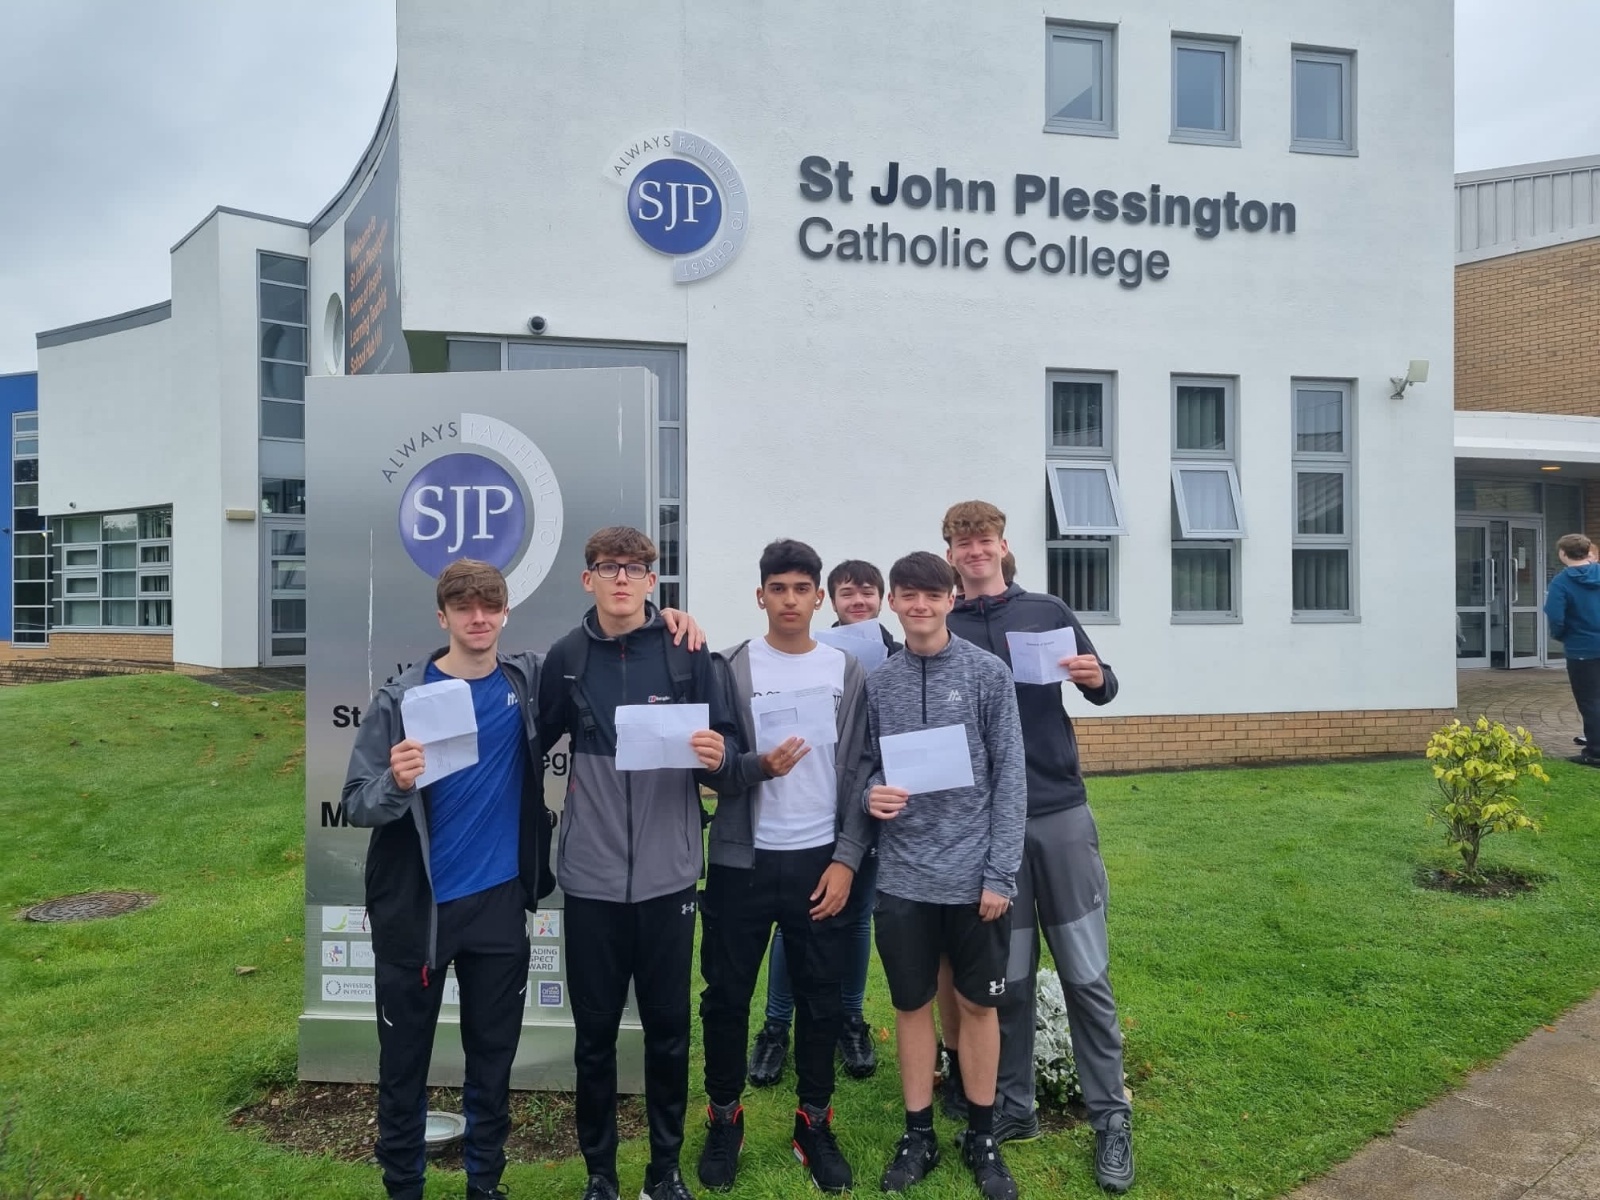 A group of St John Plessington students celebrating their results